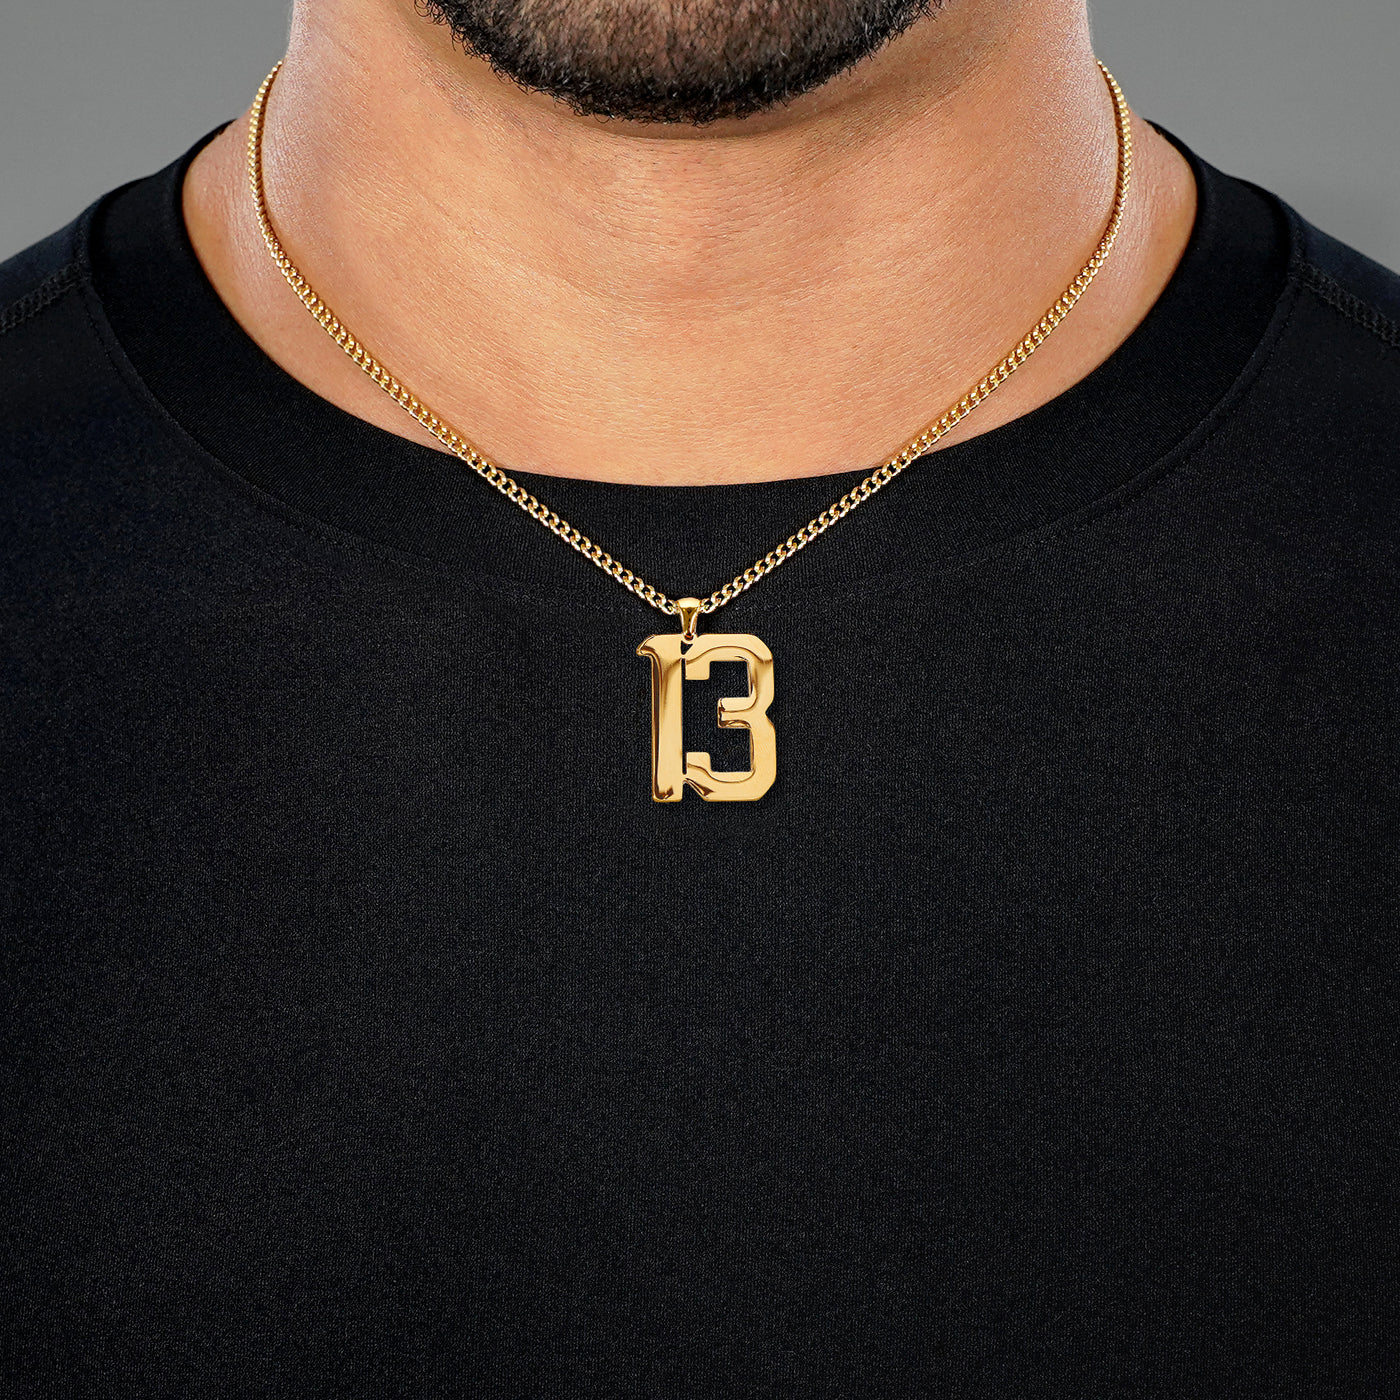 13 Number Pendant with Chain Necklace - Gold Plated Stainless Steel